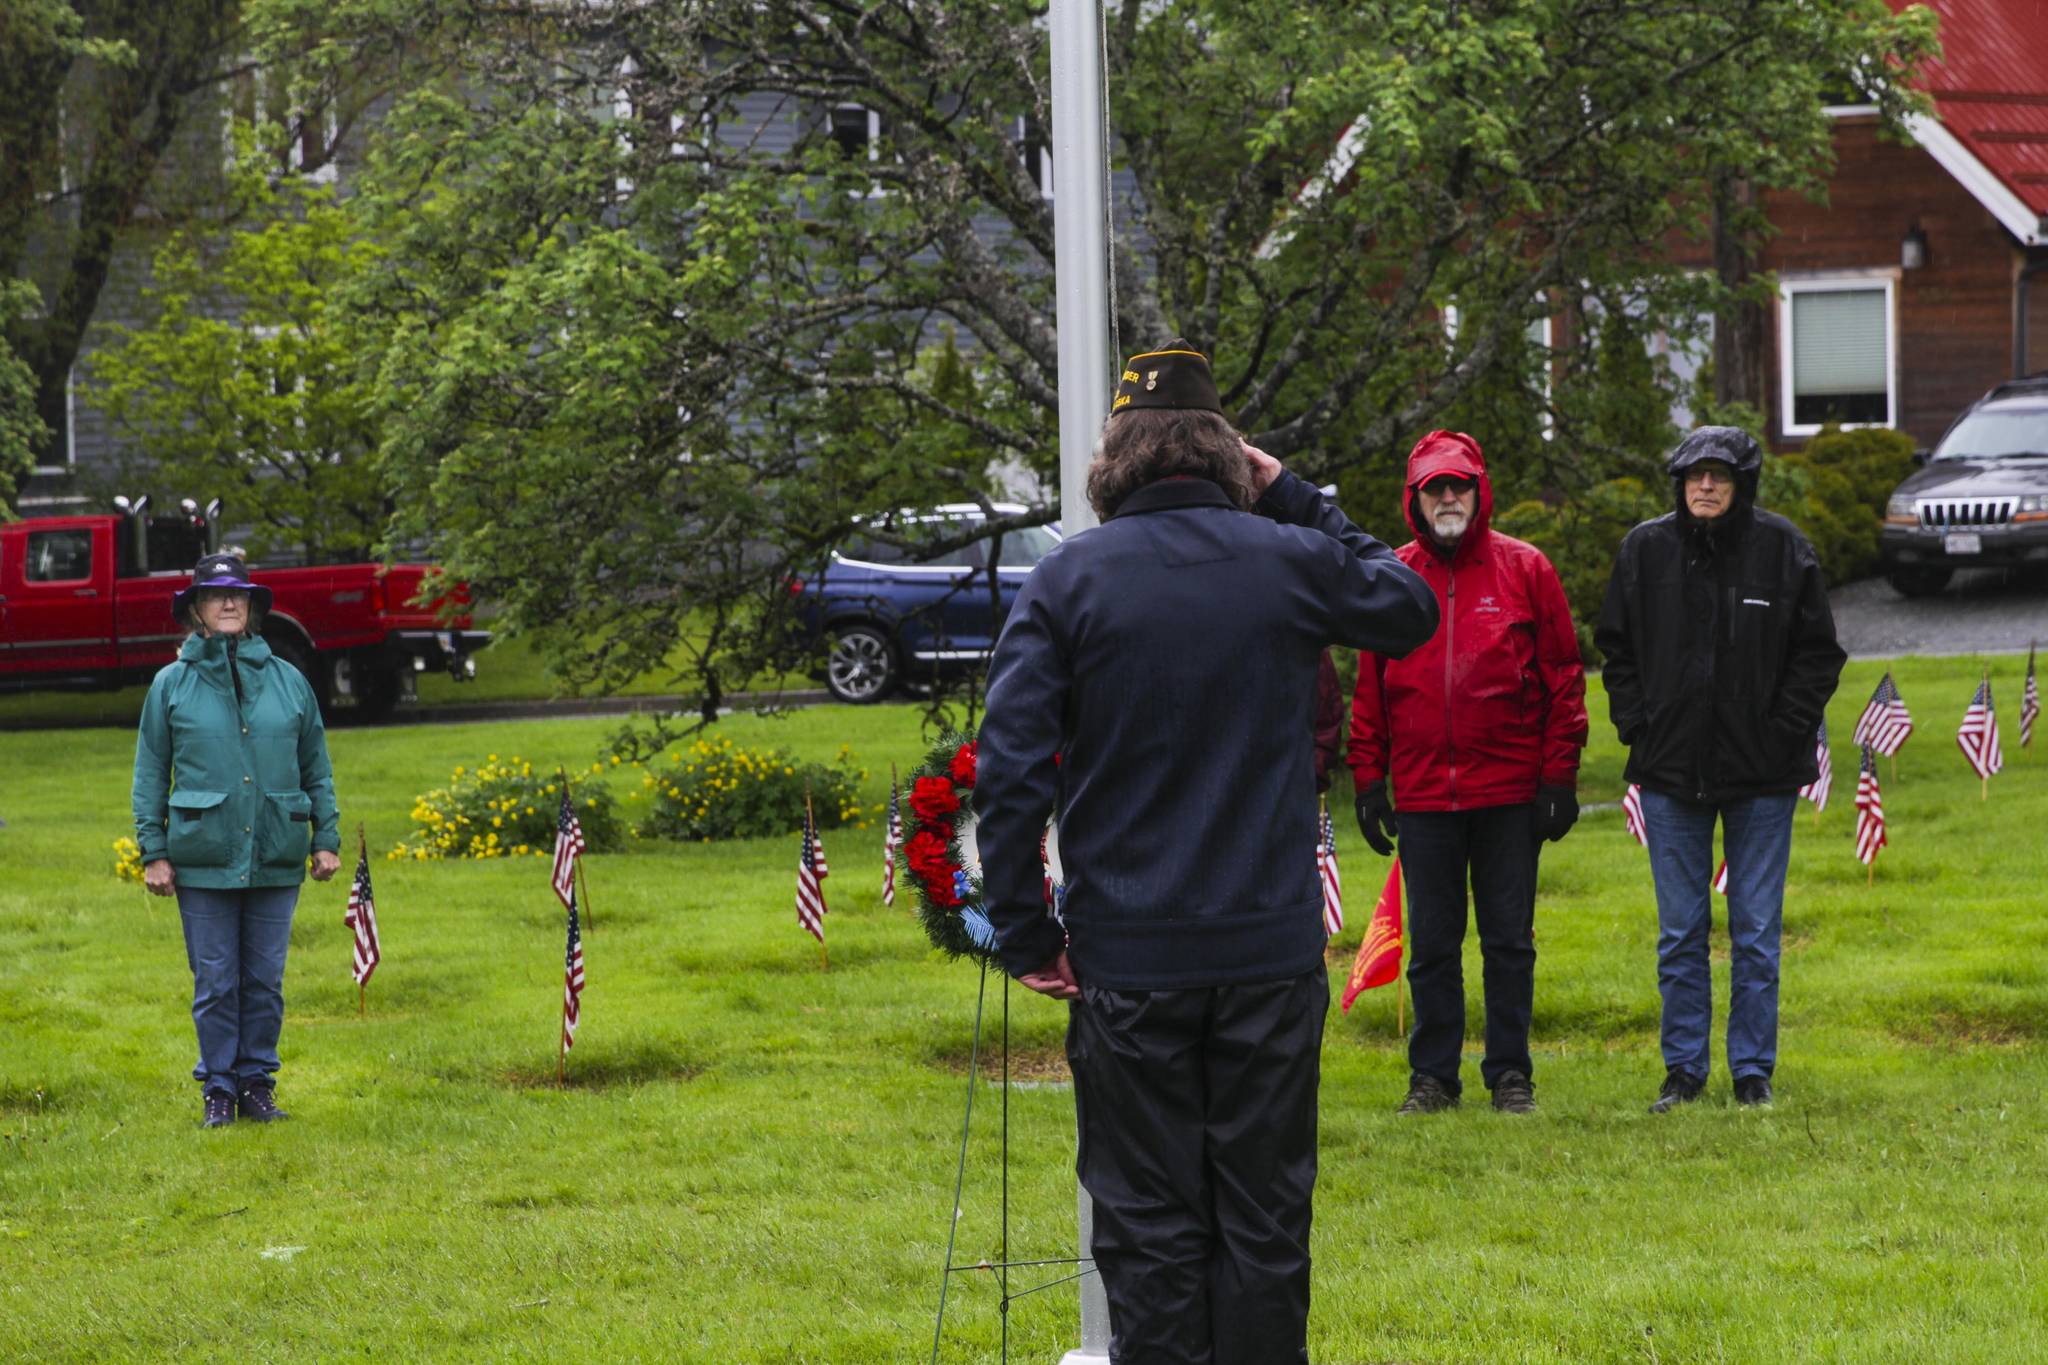 Veterans of Foreign Wars Post 5559 quartermaster Dan McCrummen salutes the wreath laid at the foot of the flagpole during a Memorial Day ceremony at Evergreen Cemetery on May 31, 2021. (Michael S. Lockett / Juneau Empire)